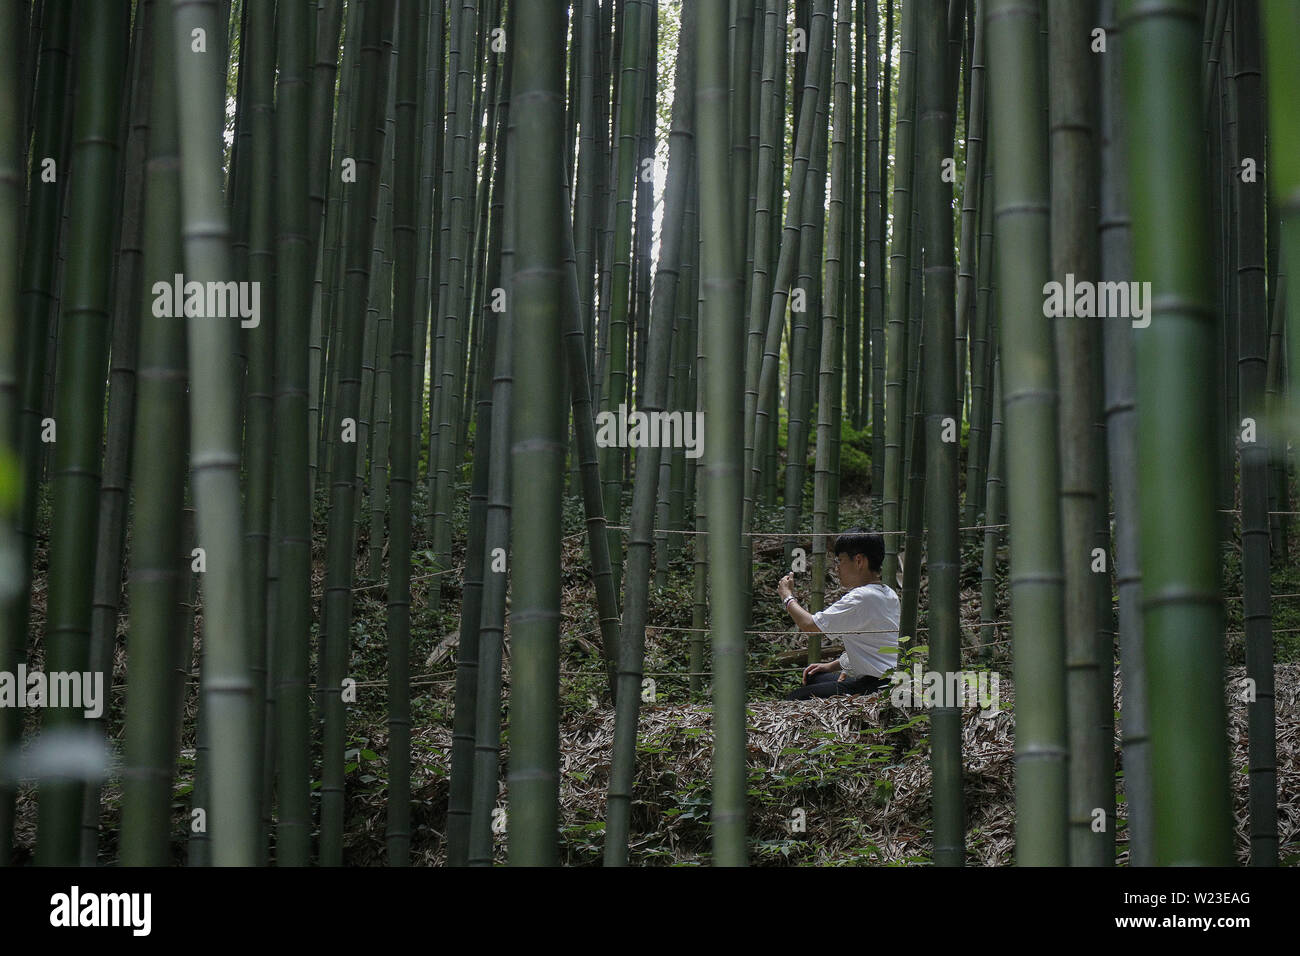 July 5, 2019 - Damyang, JEONNAM, SOUTH KOREA - July 5, 2019-Damyang, South Korea-Visitors rest with take a walk under a bamboo wood at Juknokwon in Damyang, southwest of Seoul, South Korea. A heat wave warning was issued nationwide. (Credit Image: © Ryu Seung-Il/ZUMA Wire) Stock Photo